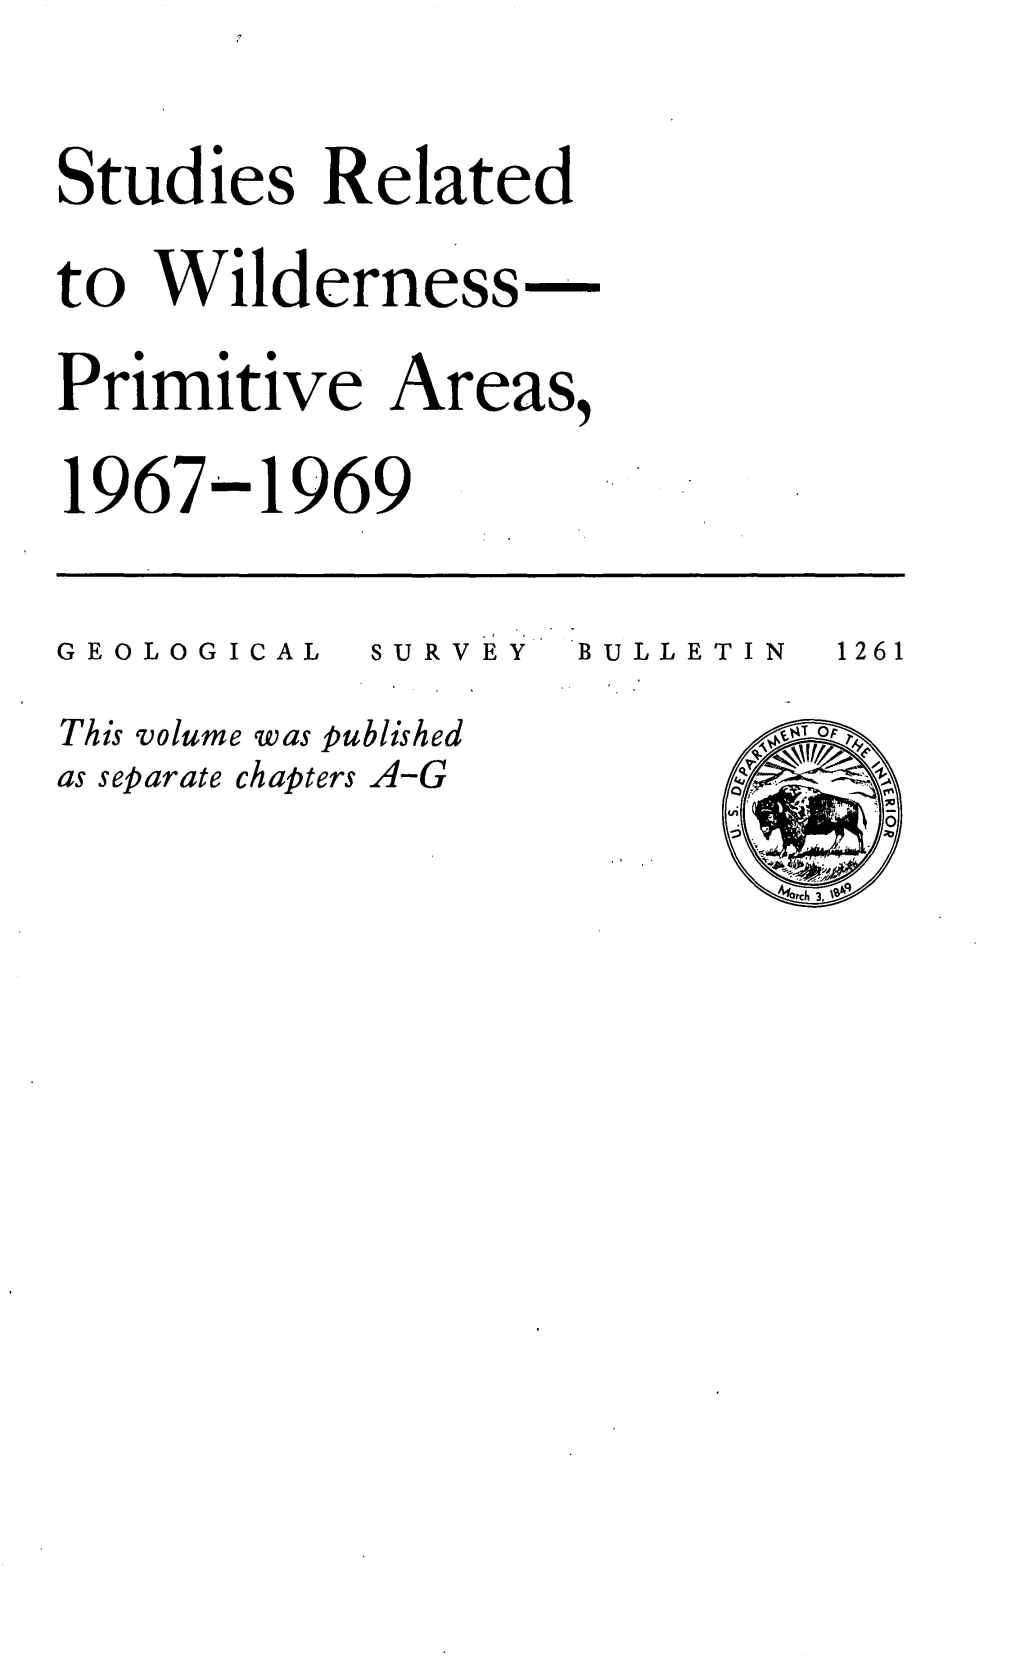 Studies Related to Wilderness Primitive Areas, 1967-1969